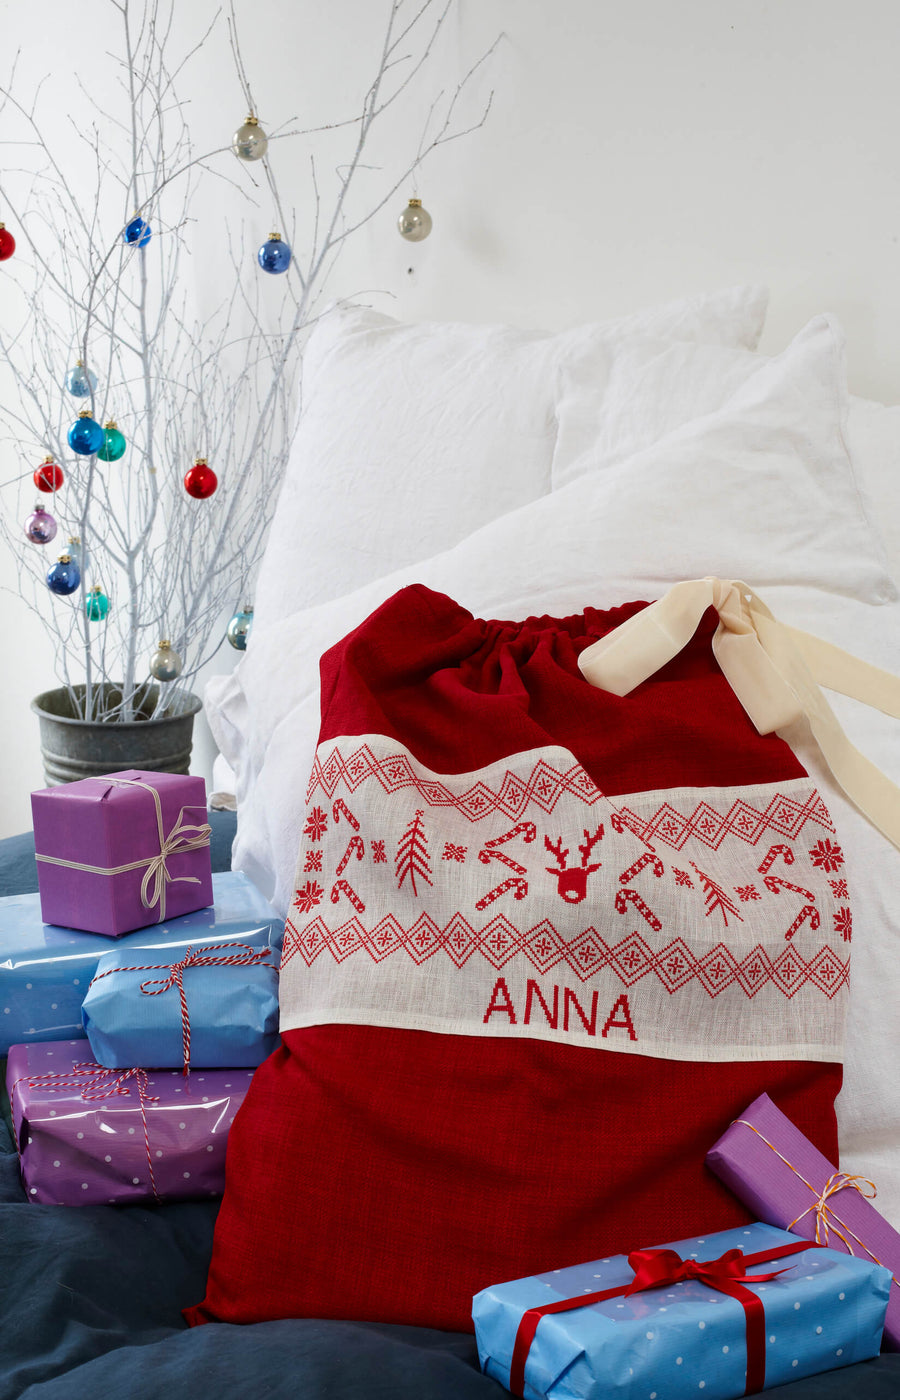 Image from the inside of the book of a personalised cross stitch Christmas sack